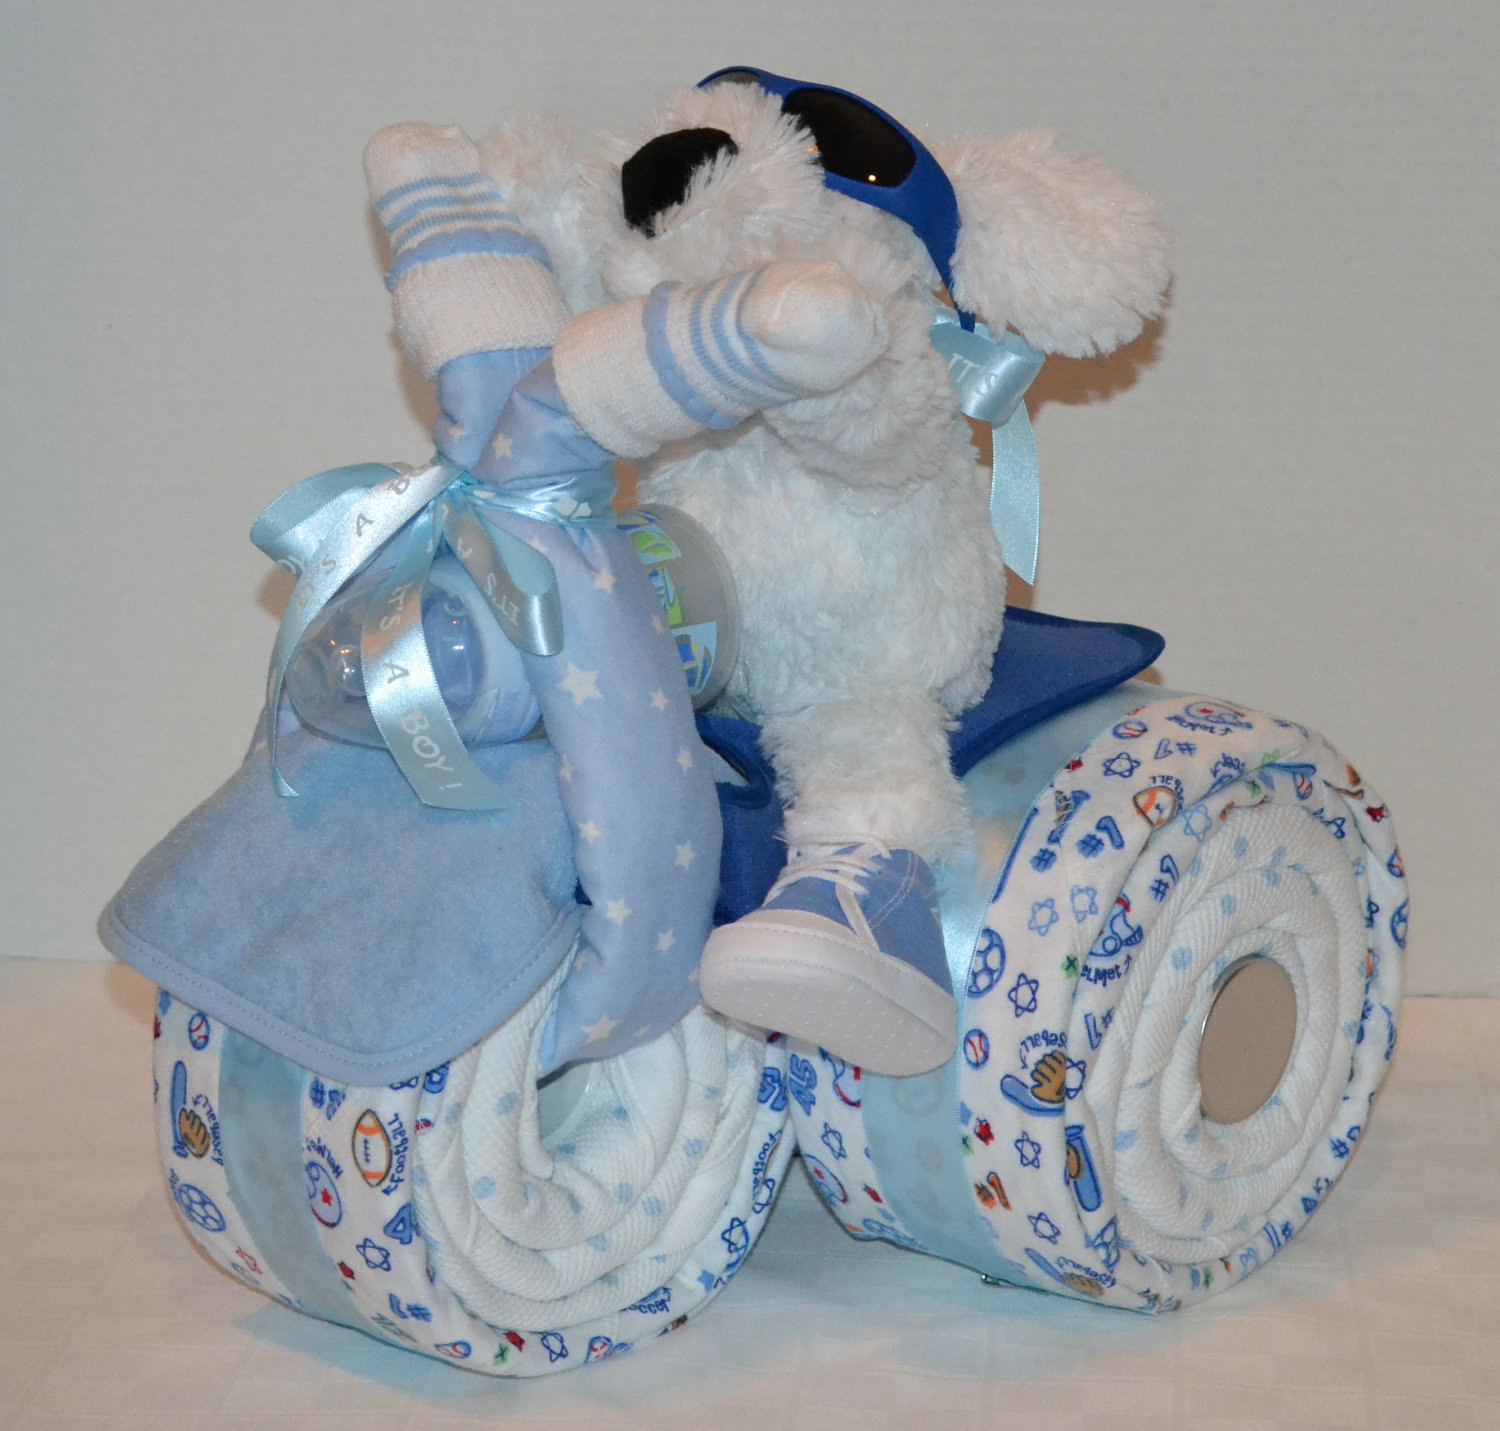 Baby Shower Gift Ideas For Boy
 Tricycle Trike Diaper Cake Baby Shower Gift Sports theme